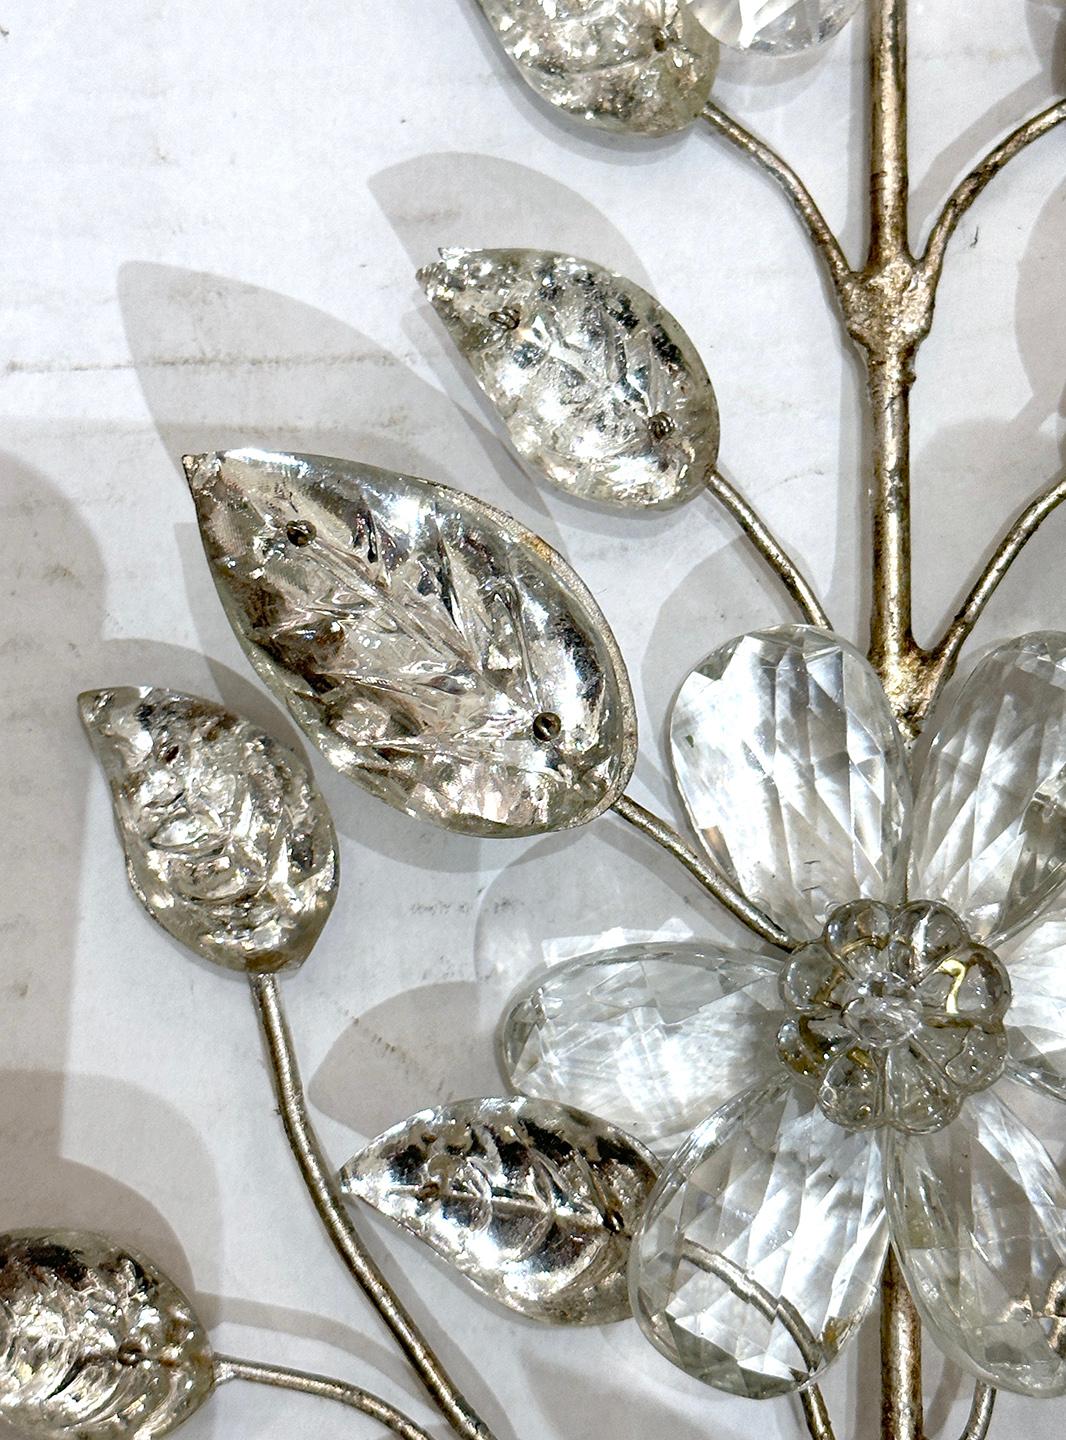 Mid-20th Century Set of French Sconces with Molded Glass Leaves. Sold in Pairs